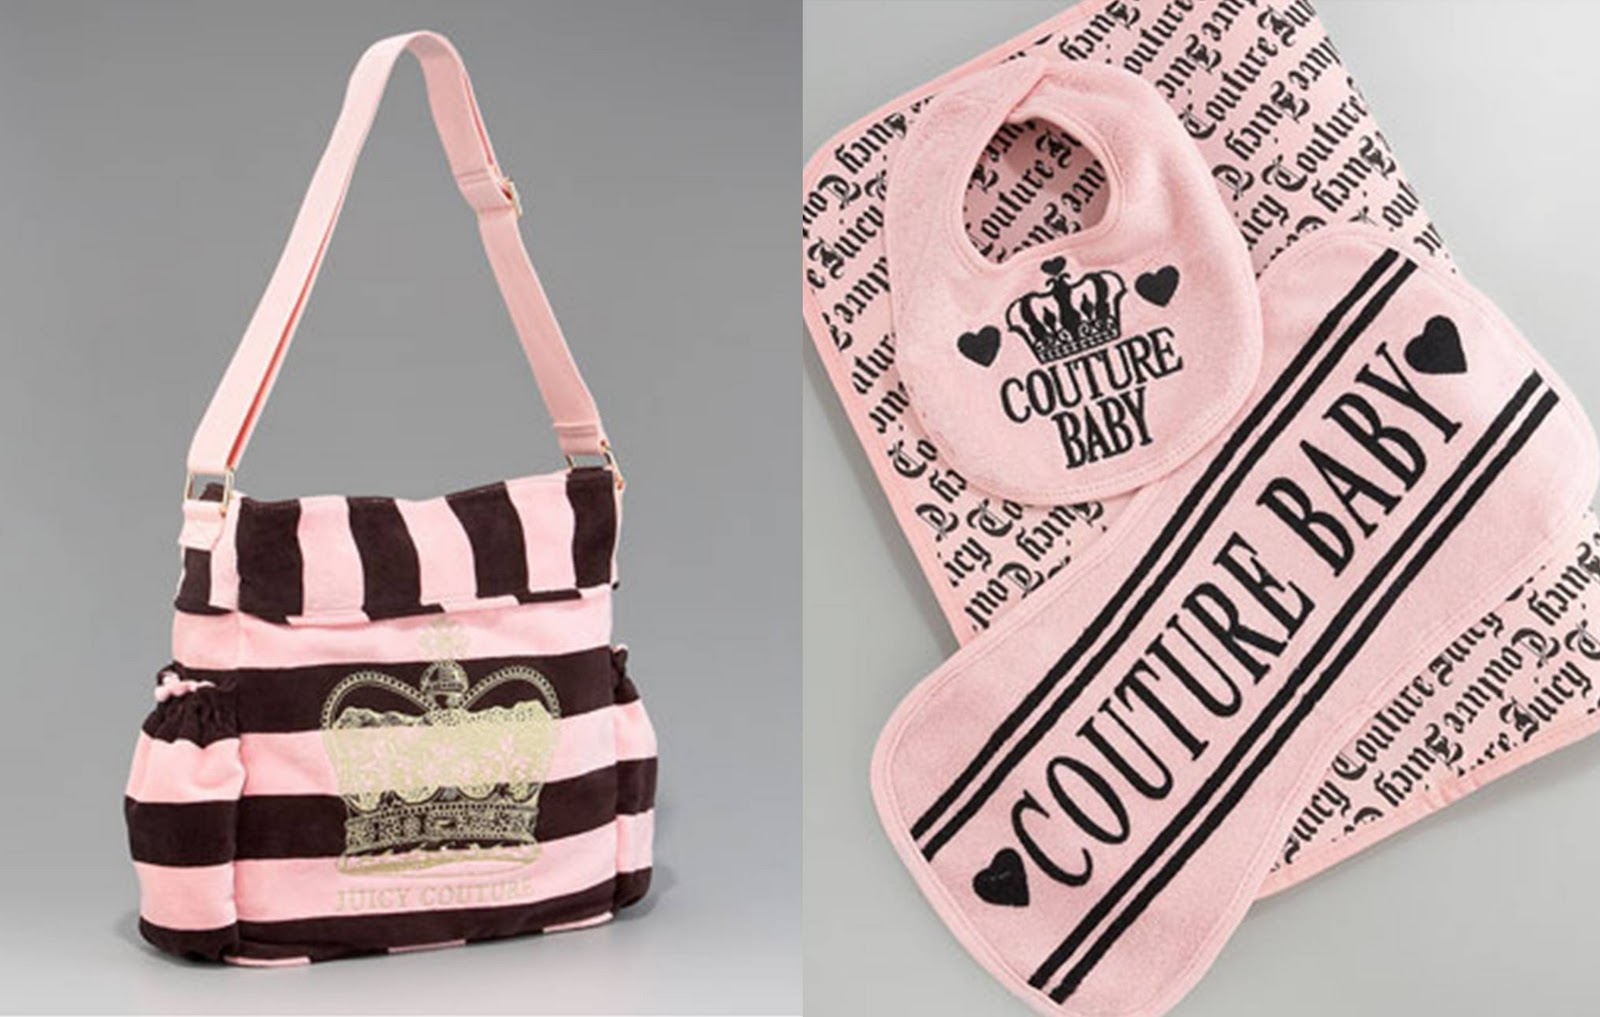 Baby Couture Bag